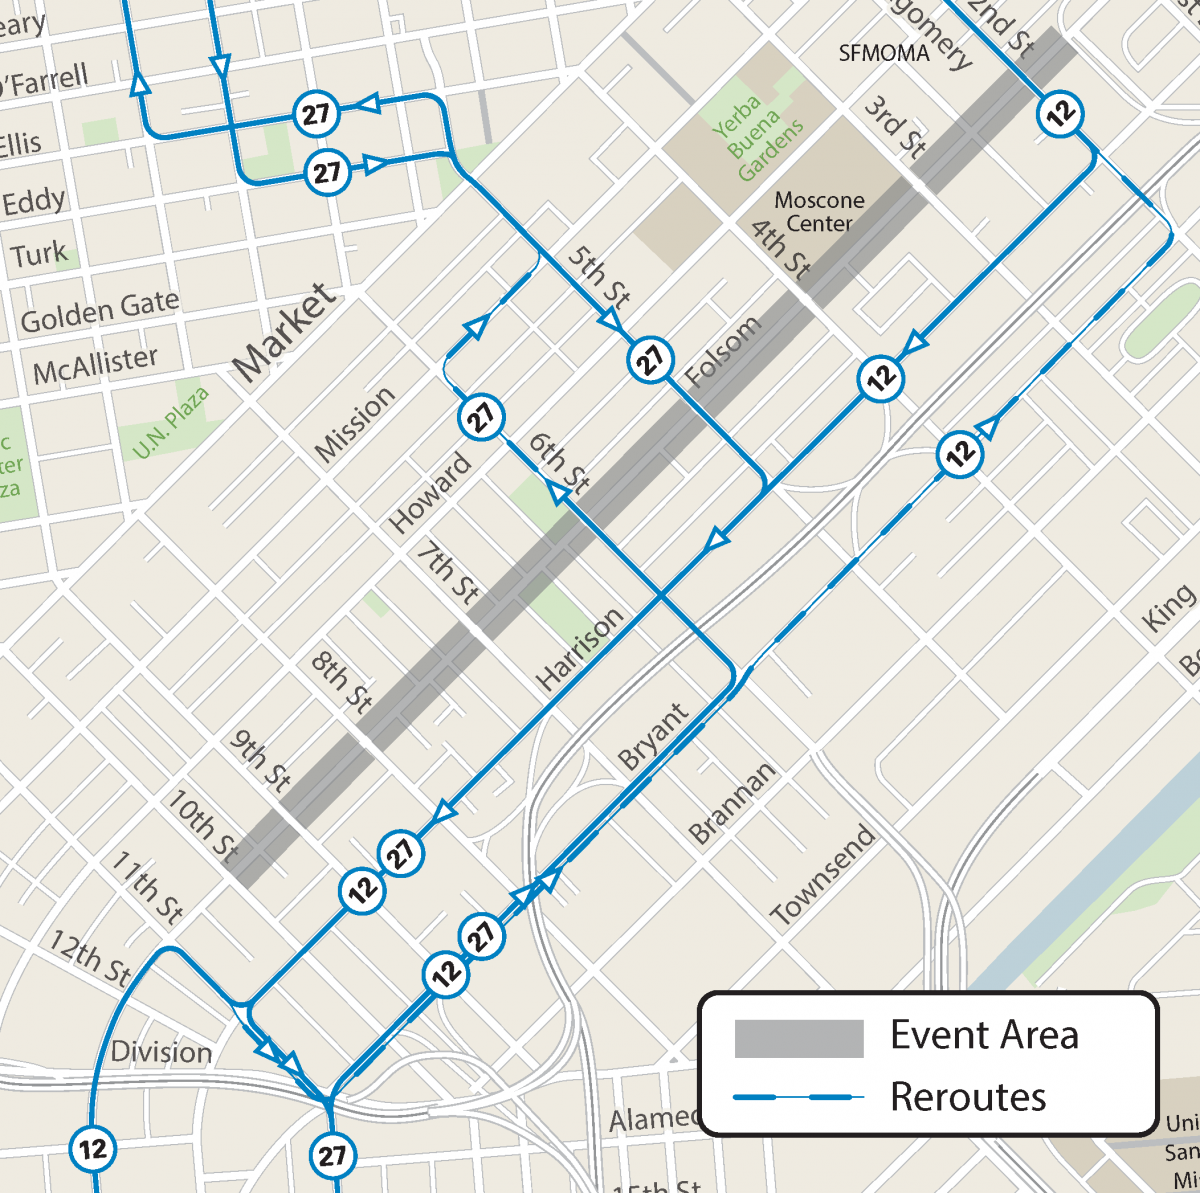 Map of street closures and Muni reroutes for Sunday Streets SoMa.